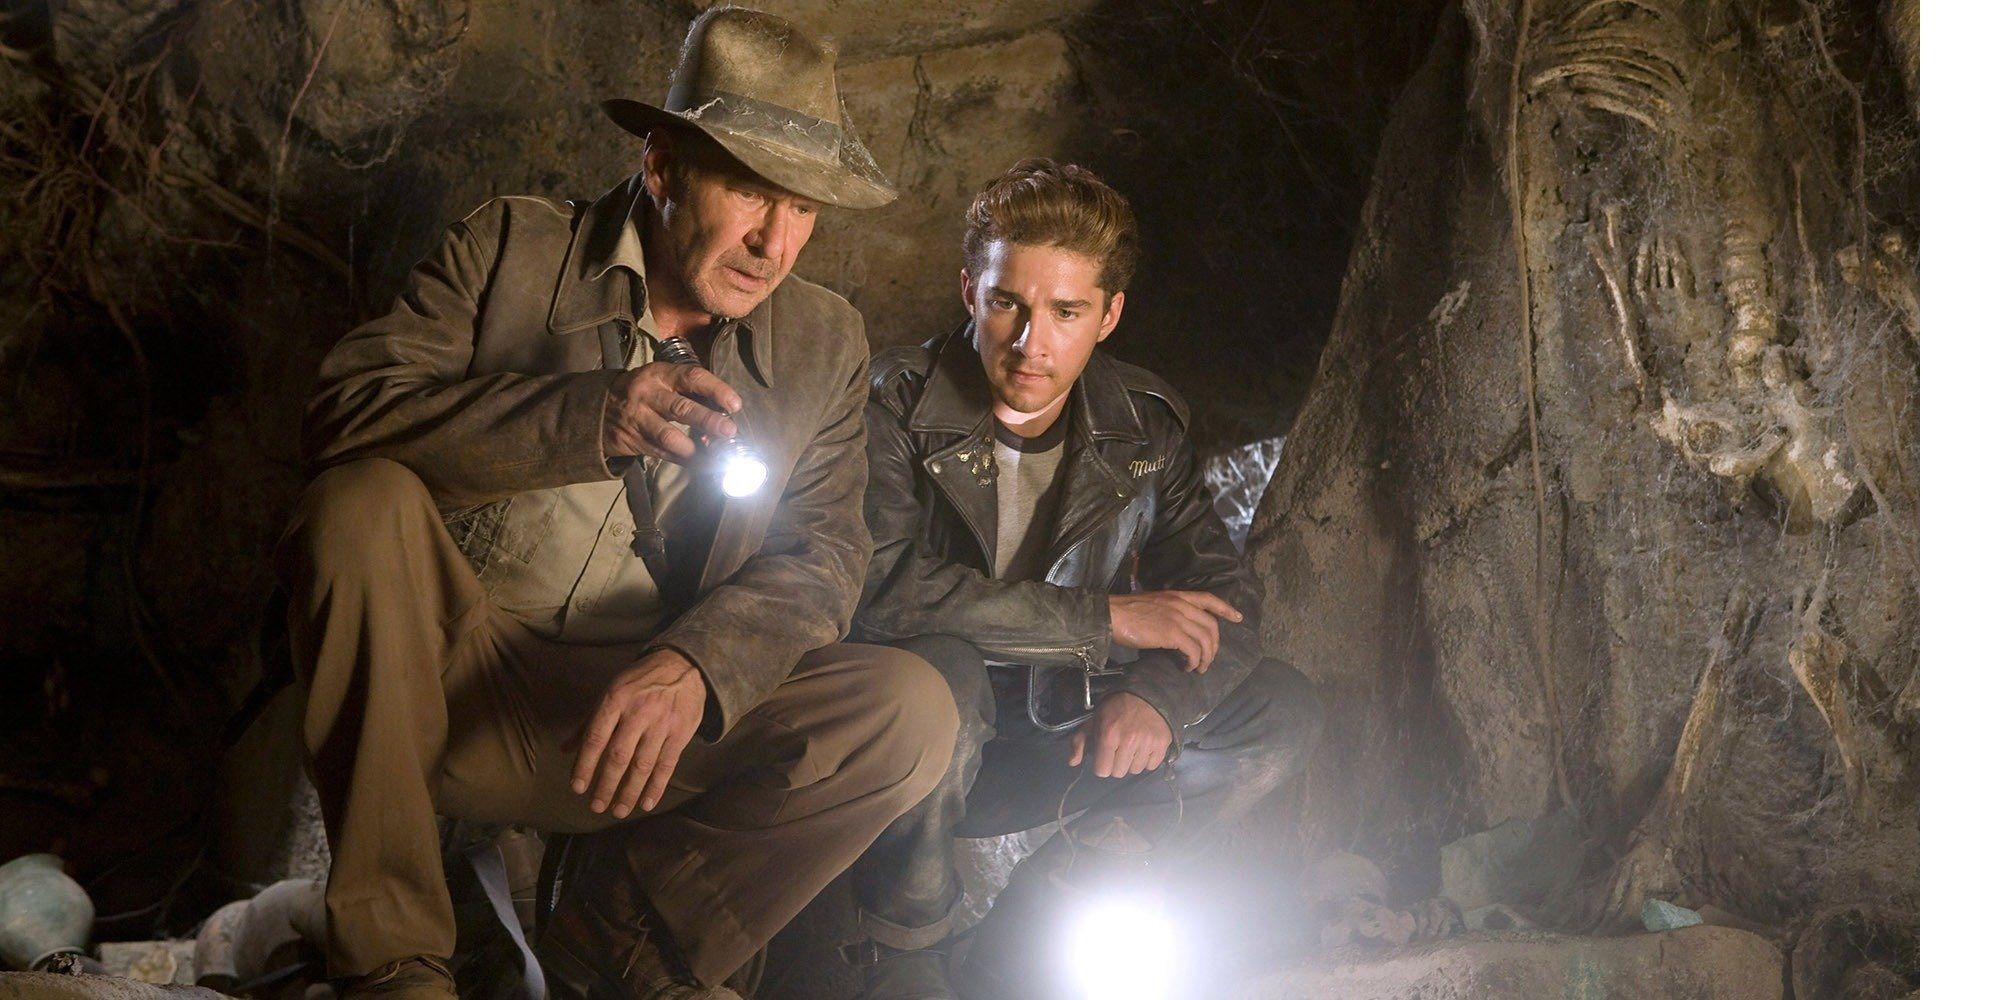 harrison-ford-and-shiab-lebouf-in-indiana-jones-and-the-kingdom-of-the-crystal-skull